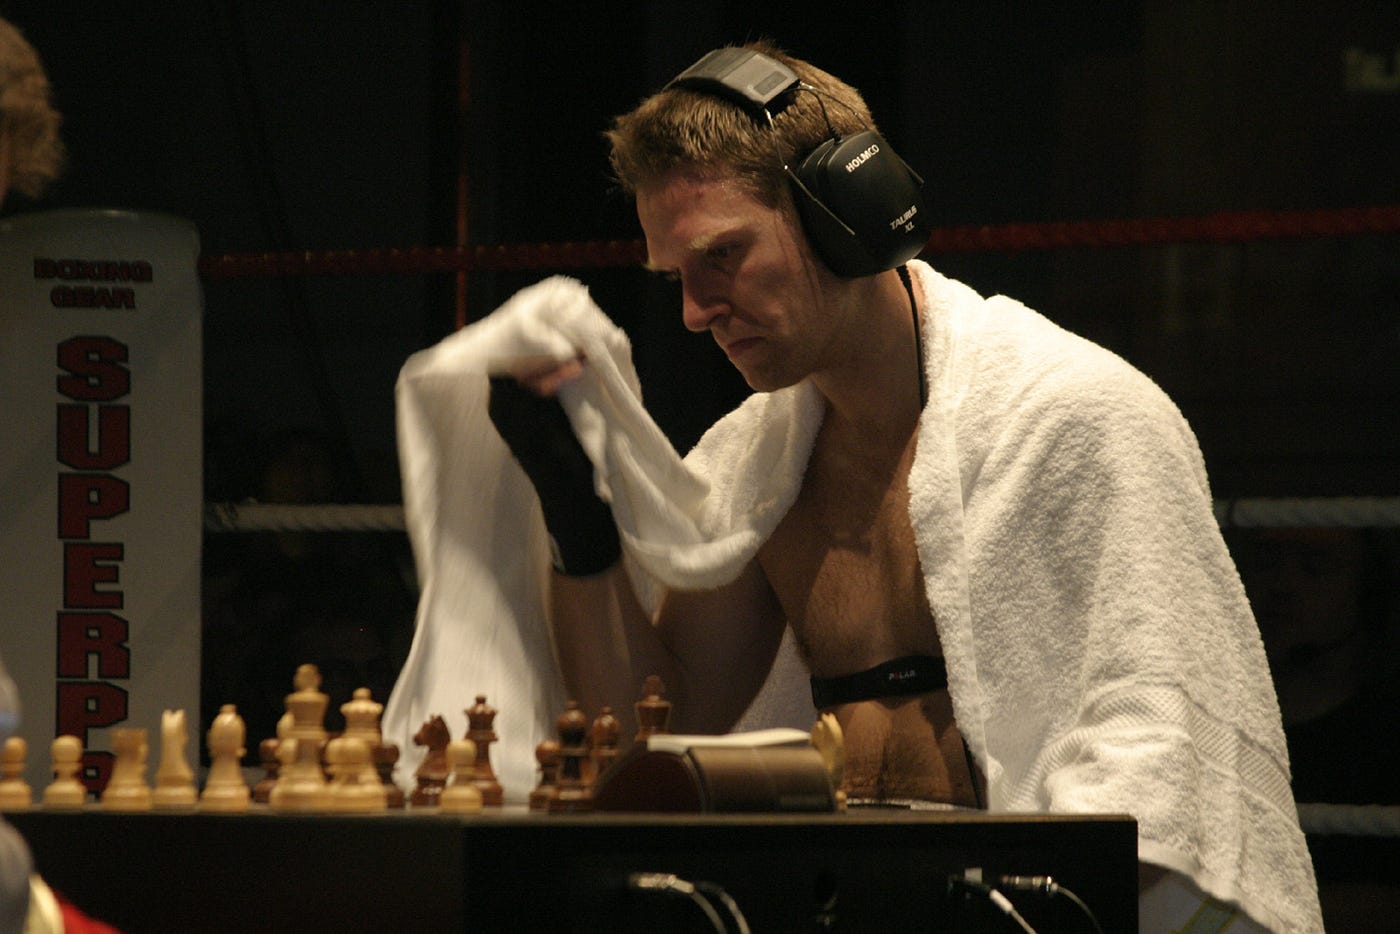 Chessboxing match at the intellectual fight club in Berlin Stock